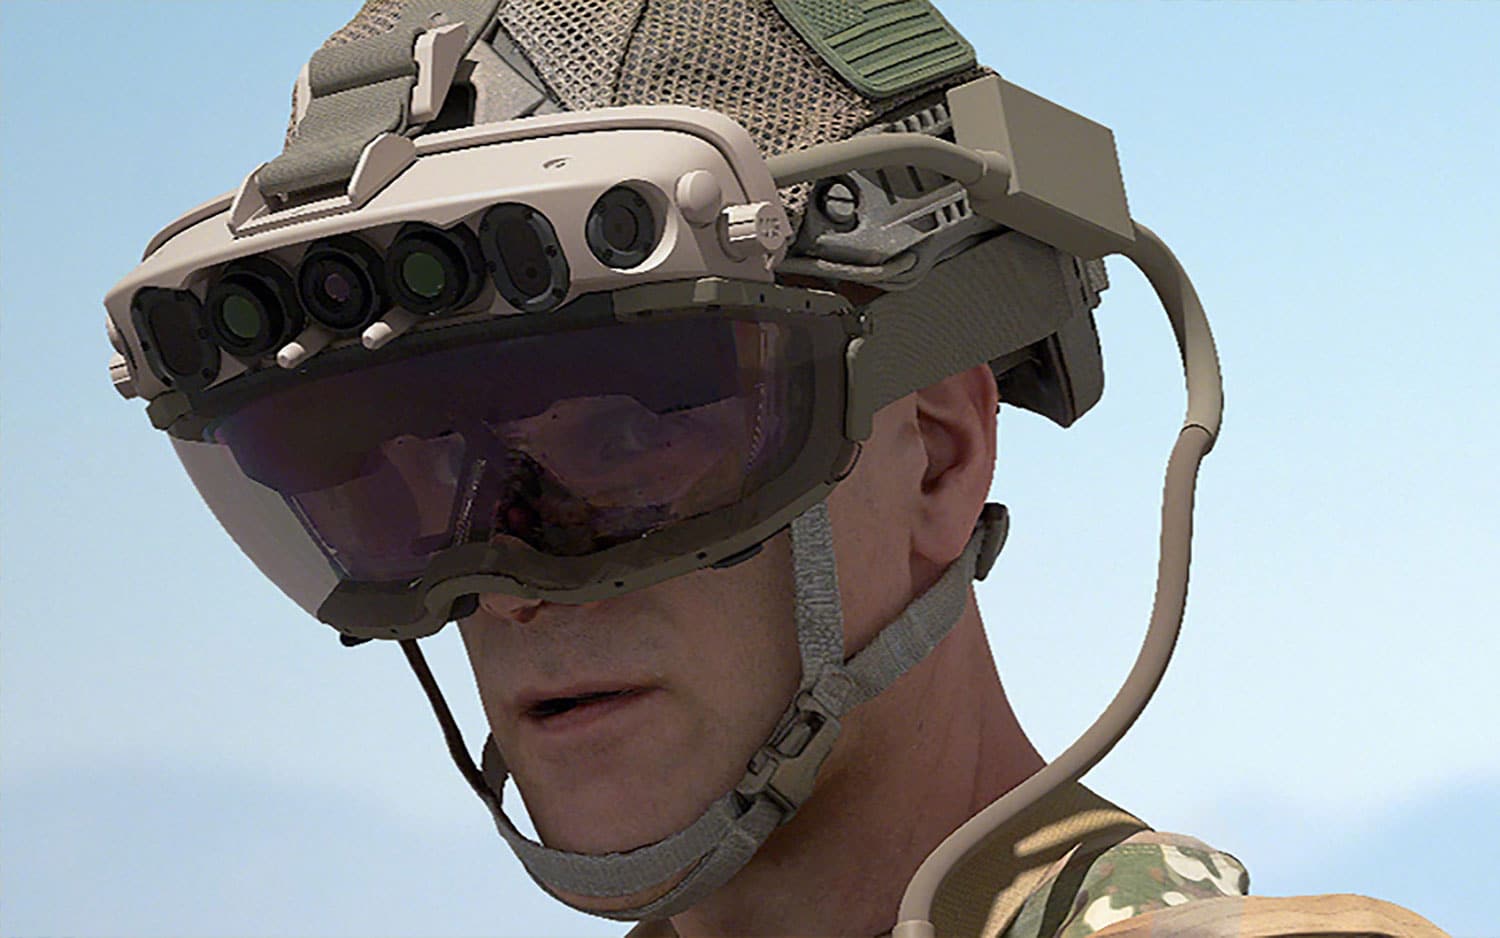 Microsoft wins contract to supply US Army with HoloLens-based headset.